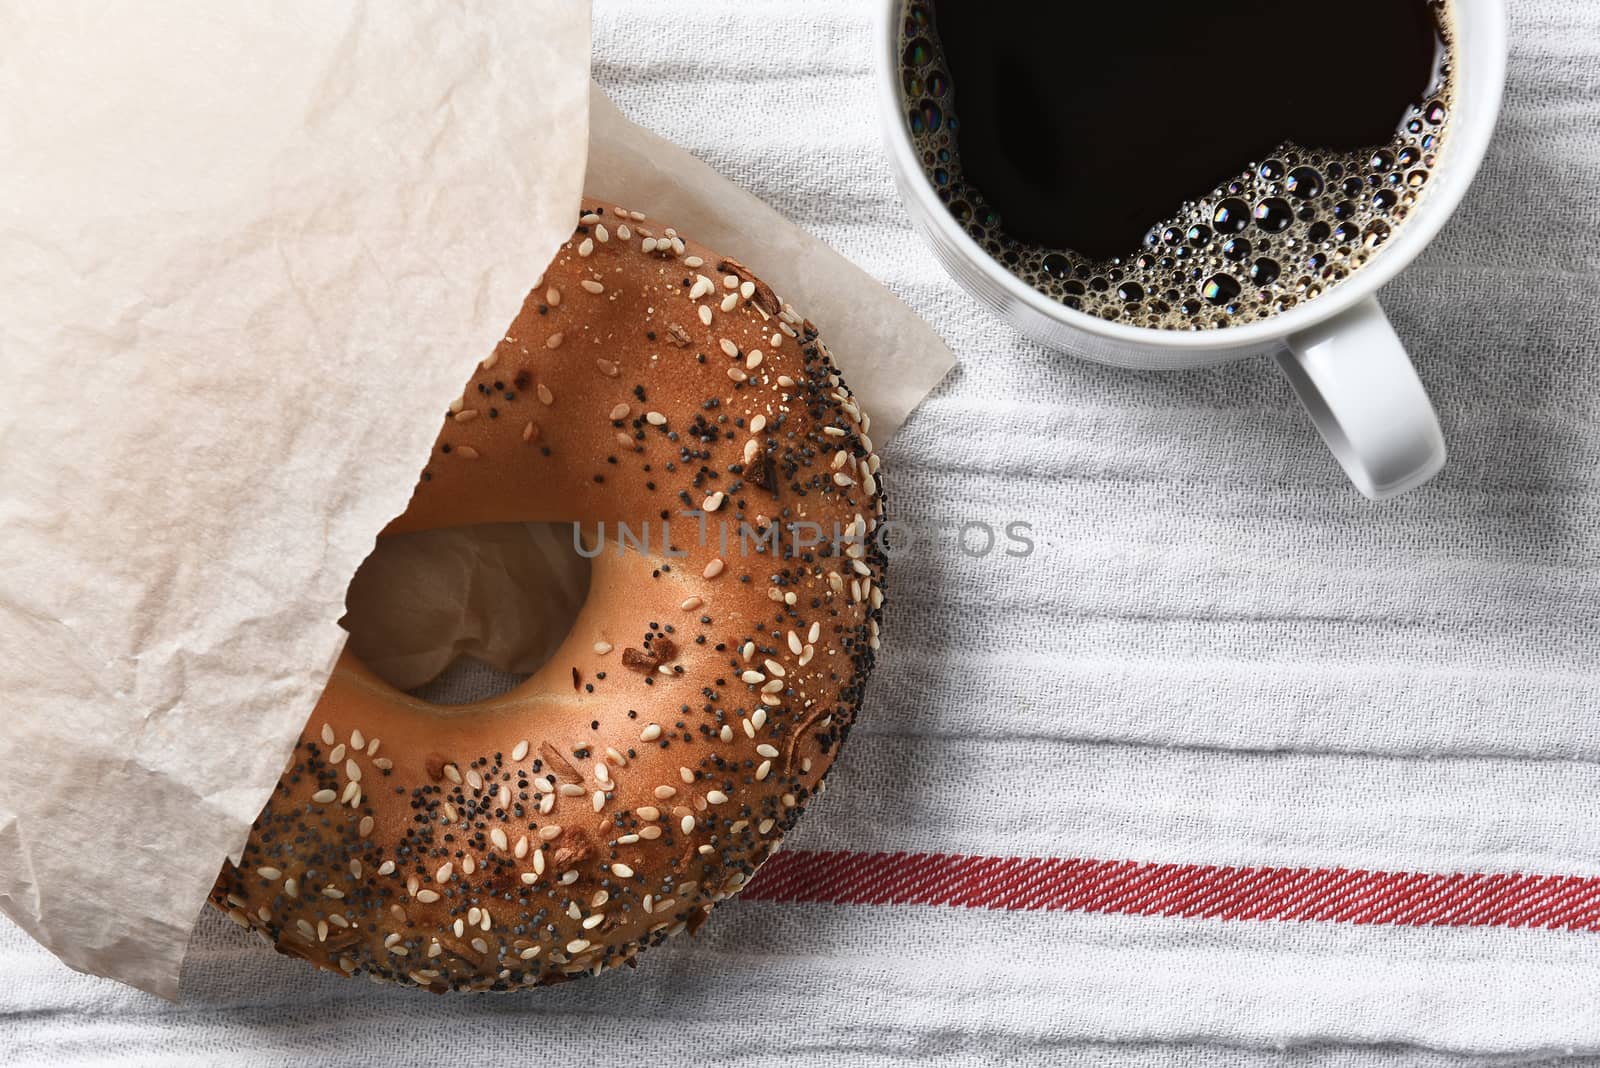 Fresh bagel and hot cup of coffee on a tea towel. High angle view in horizontal format.